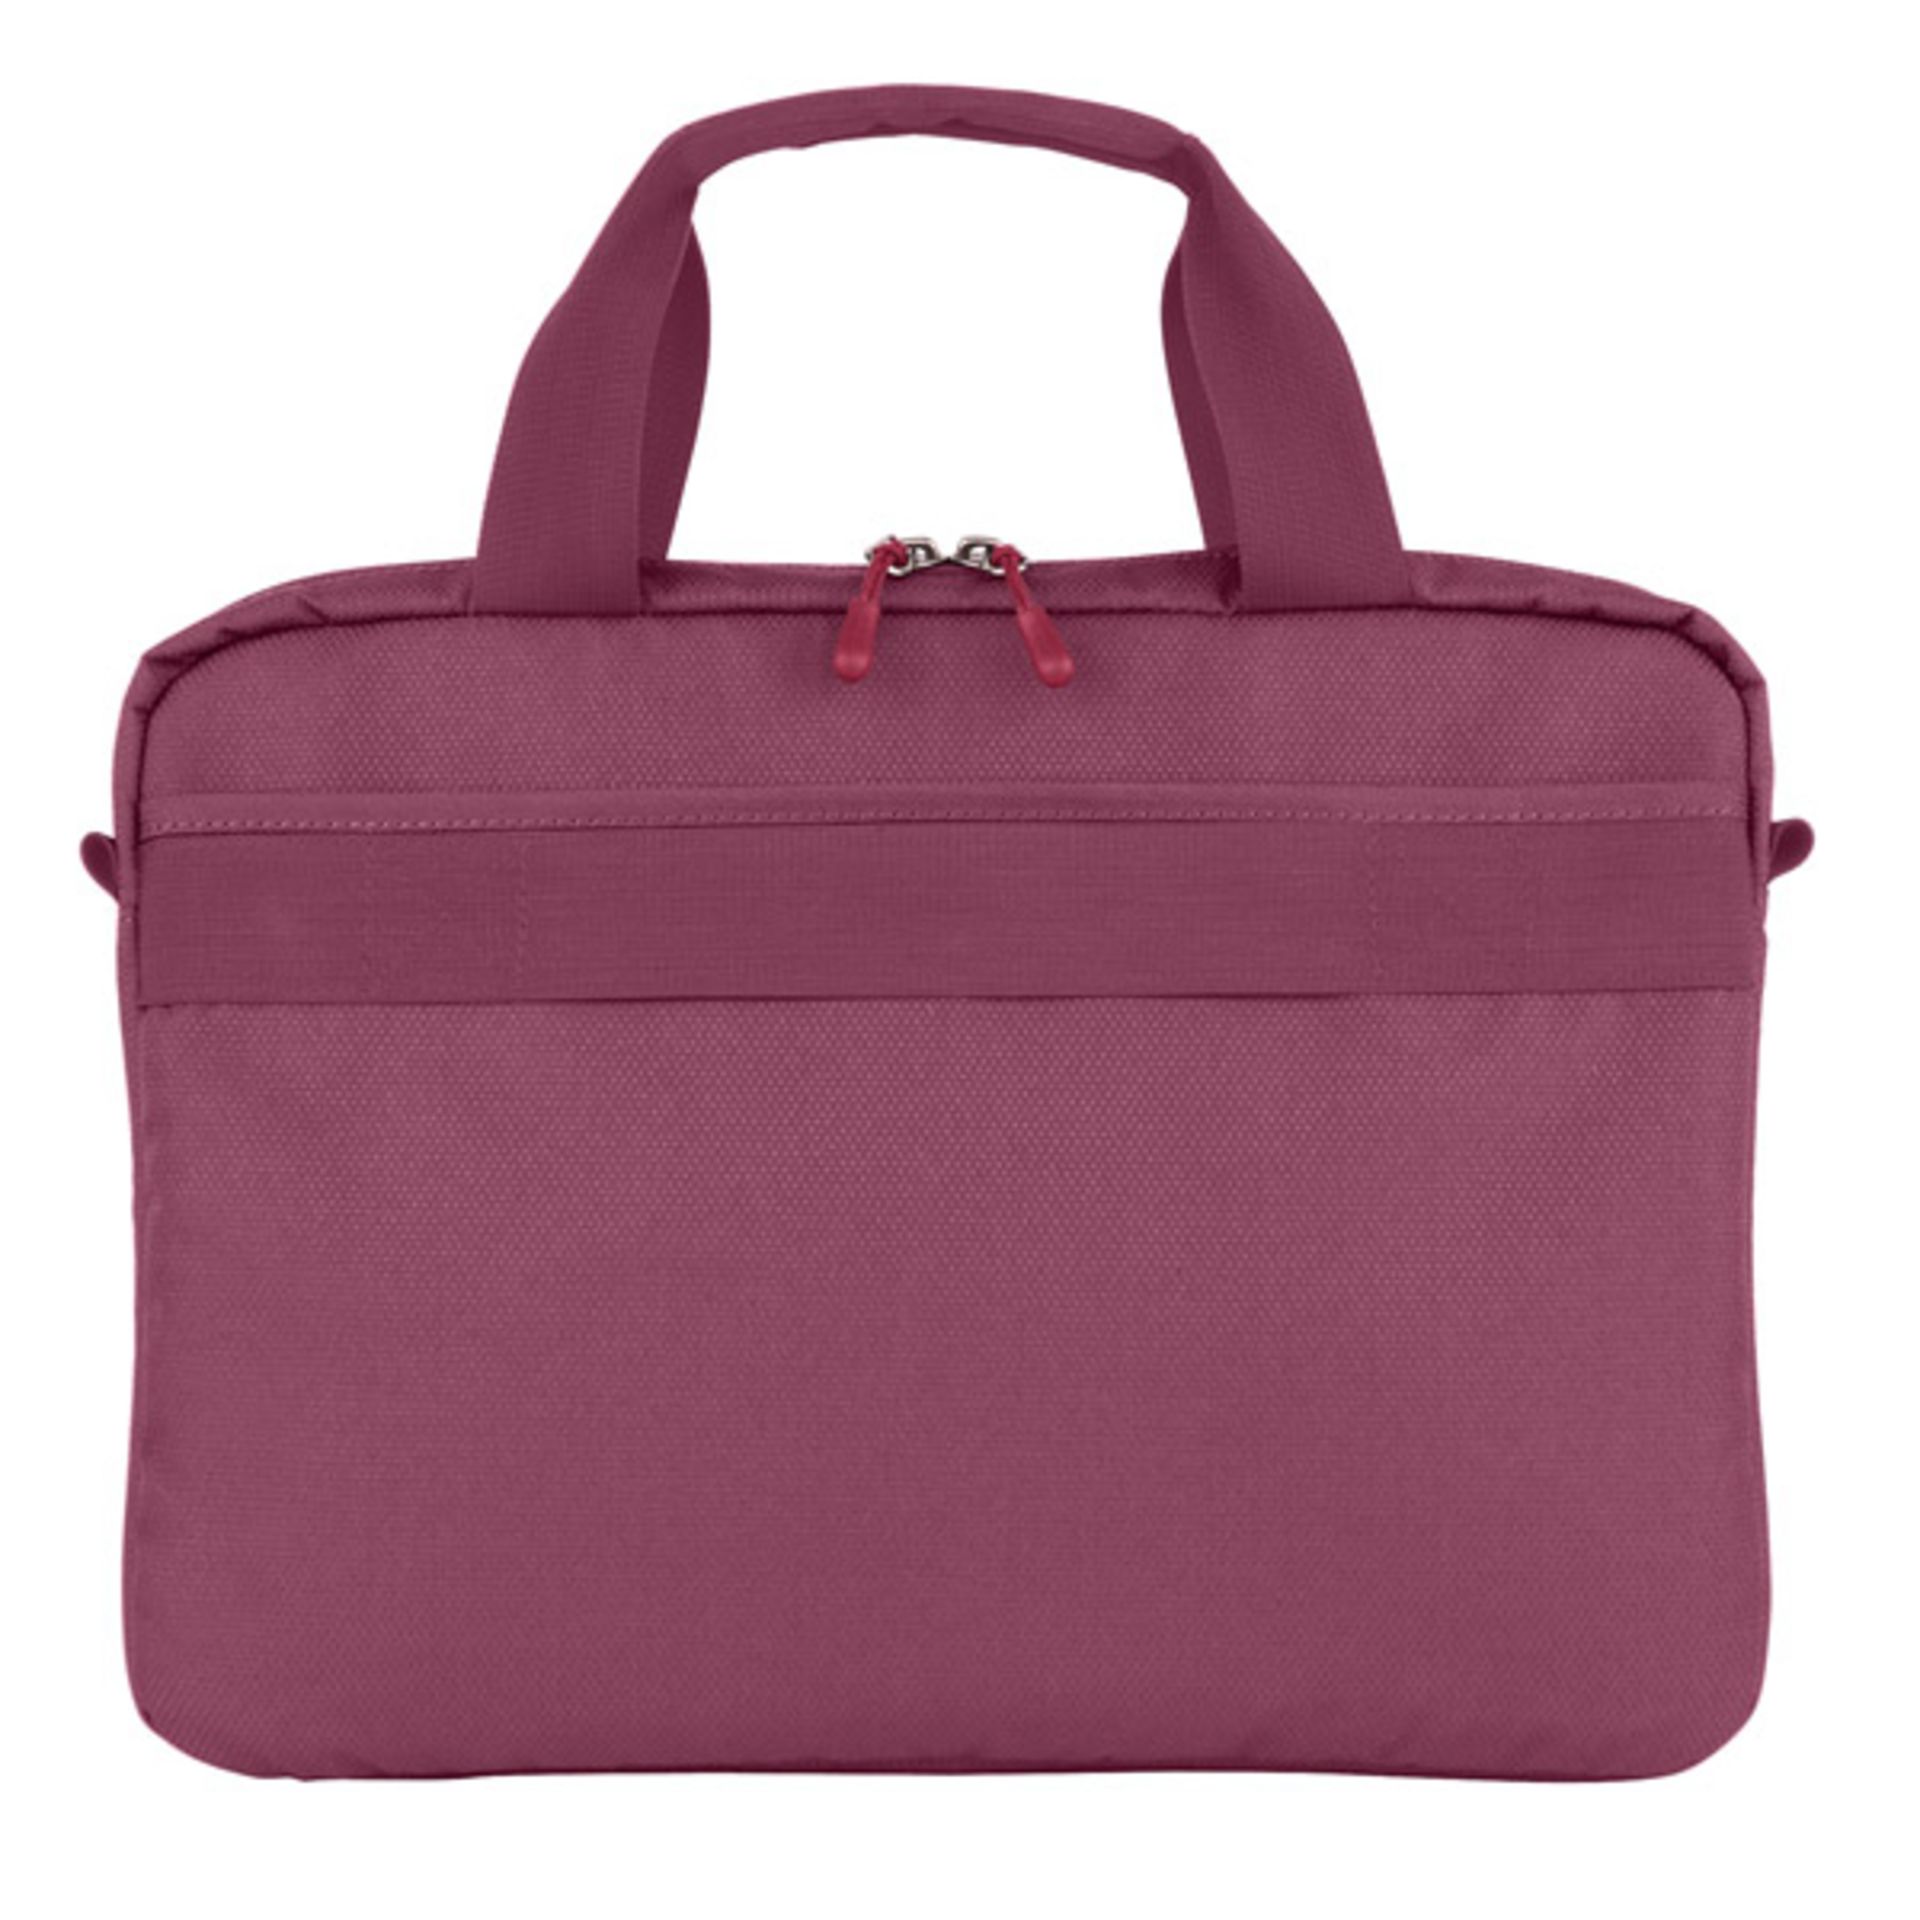 + VAT Brand New Medium Shoulder Bag - RRP £42.99 Amazon Price £33.57 - For Laptop/Tablet Up To - Image 3 of 3